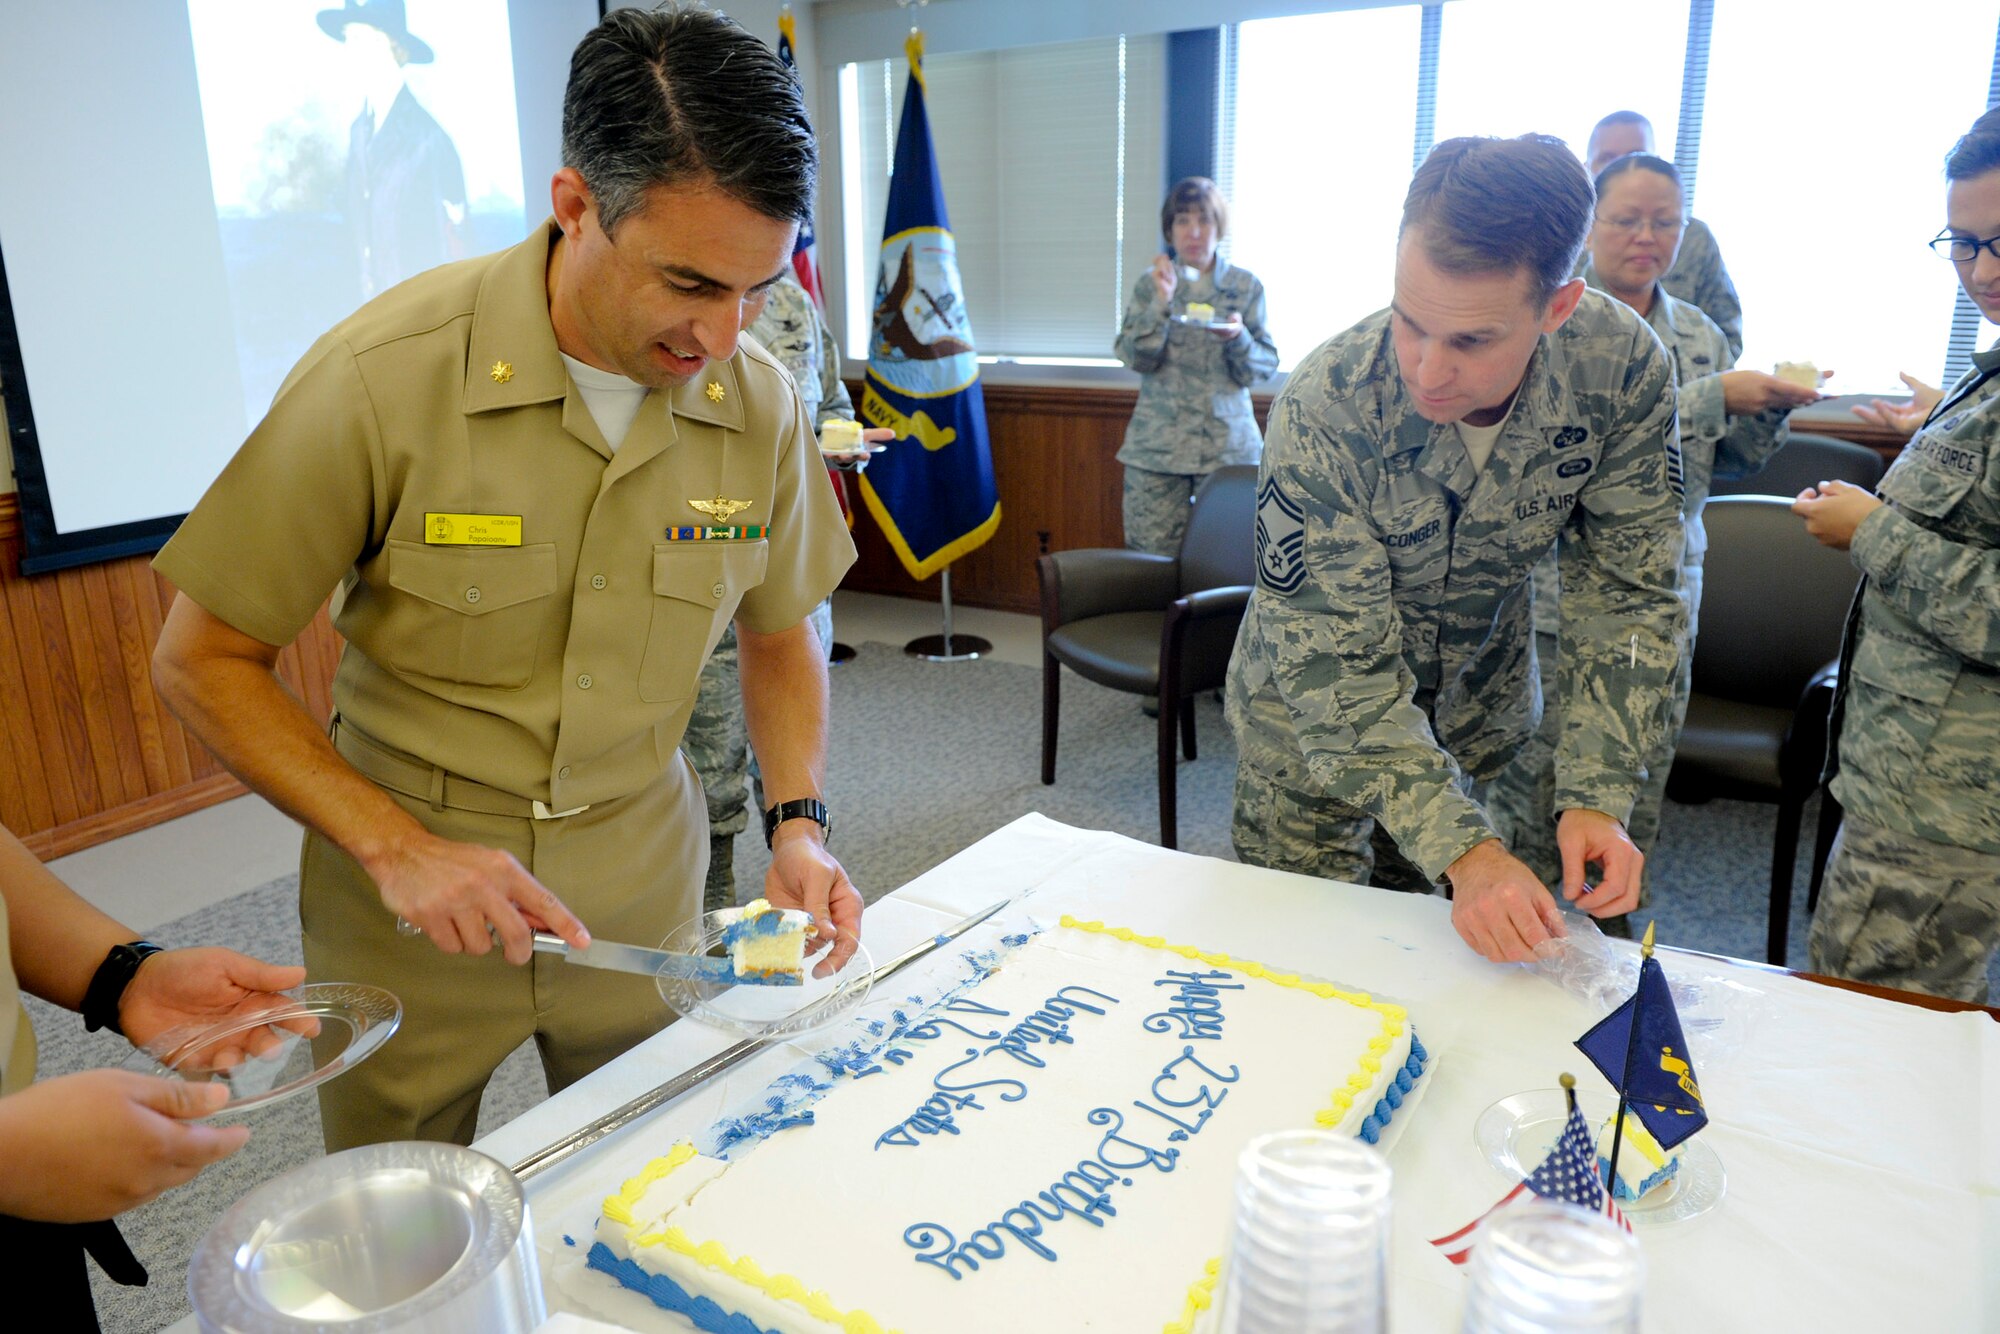 VANDENBERG AIR FORCE BASE, Calif. -- Lt. Cmdr. Christopher Papaioanu, a Joint Functional Component Command for Space operations officer, serves the  cake during the U.S. Navy's 237th Birthday celebration here Friday, Oct 12, 2012. Currently a modern force of 287 ships and more than 3,700 aircraft, our Navy was created in 1775 with the establishment of the Continental Navy to sail against British merchant ships. (U.S. Air Force photo/Staff Sgt. Levi Riendeau)
